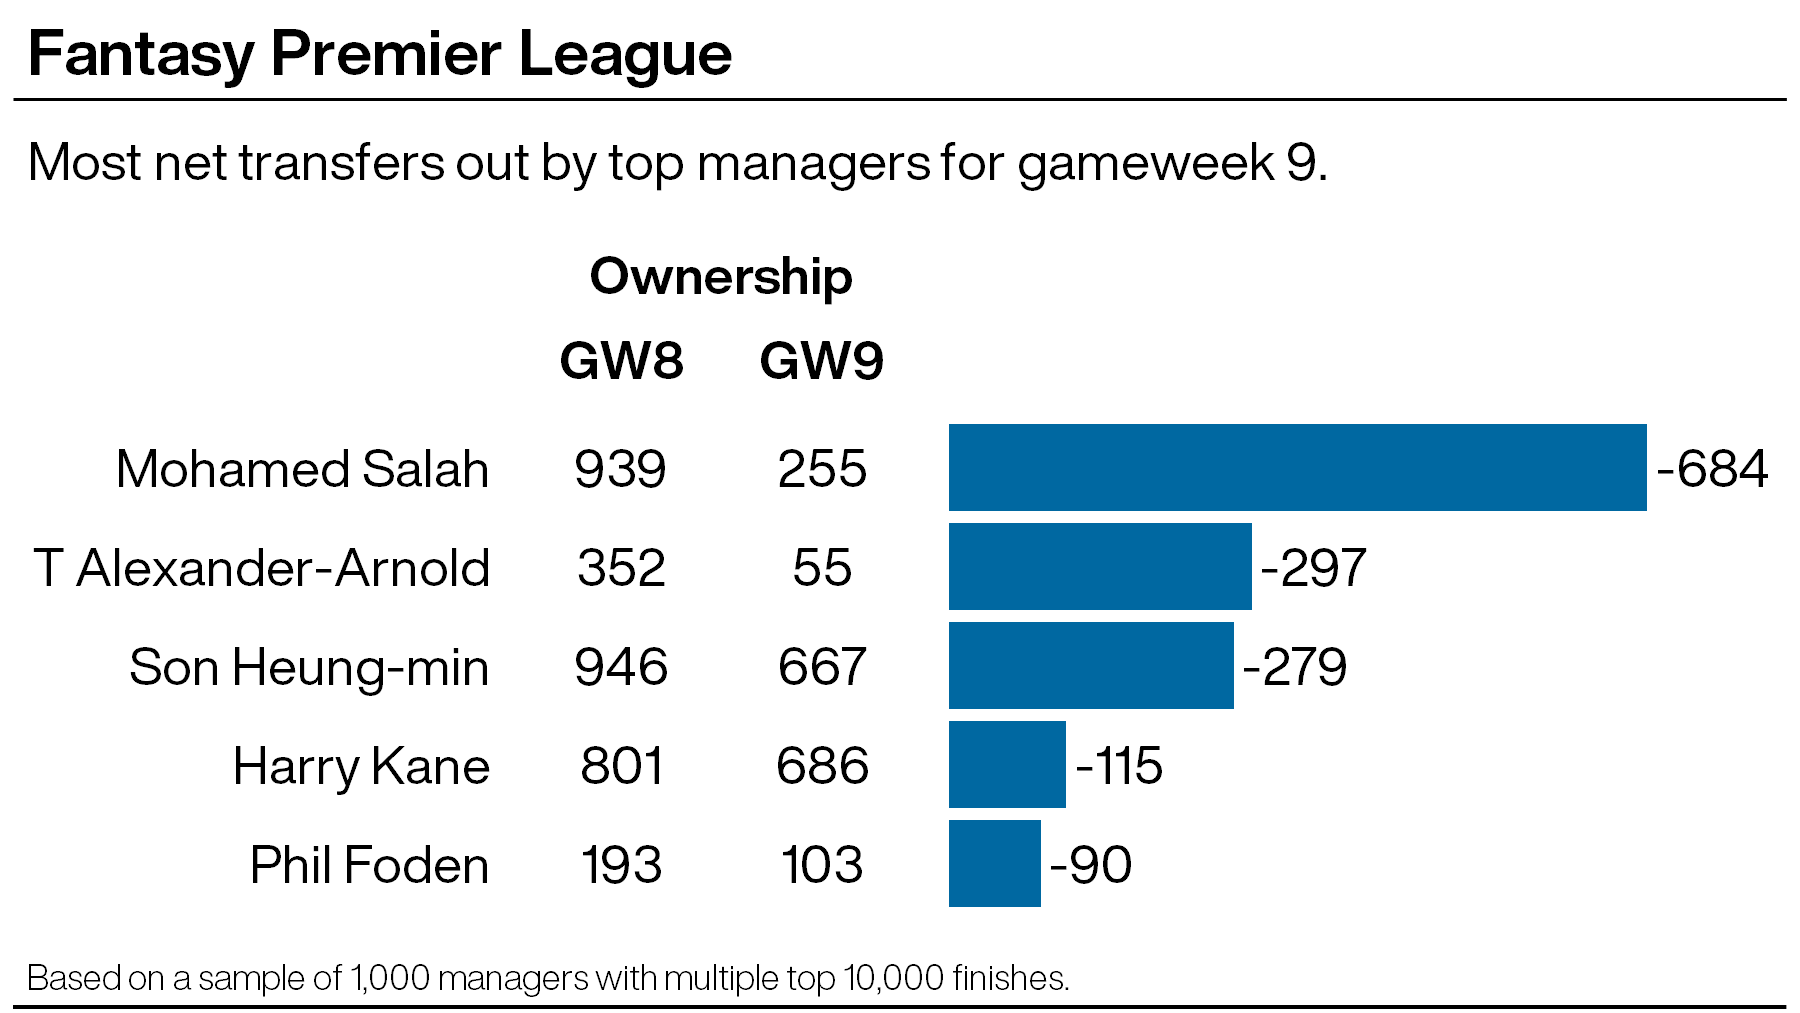 Mohamed Salah was the most transferred-out player in Gameweek 9 (PA Graphic)